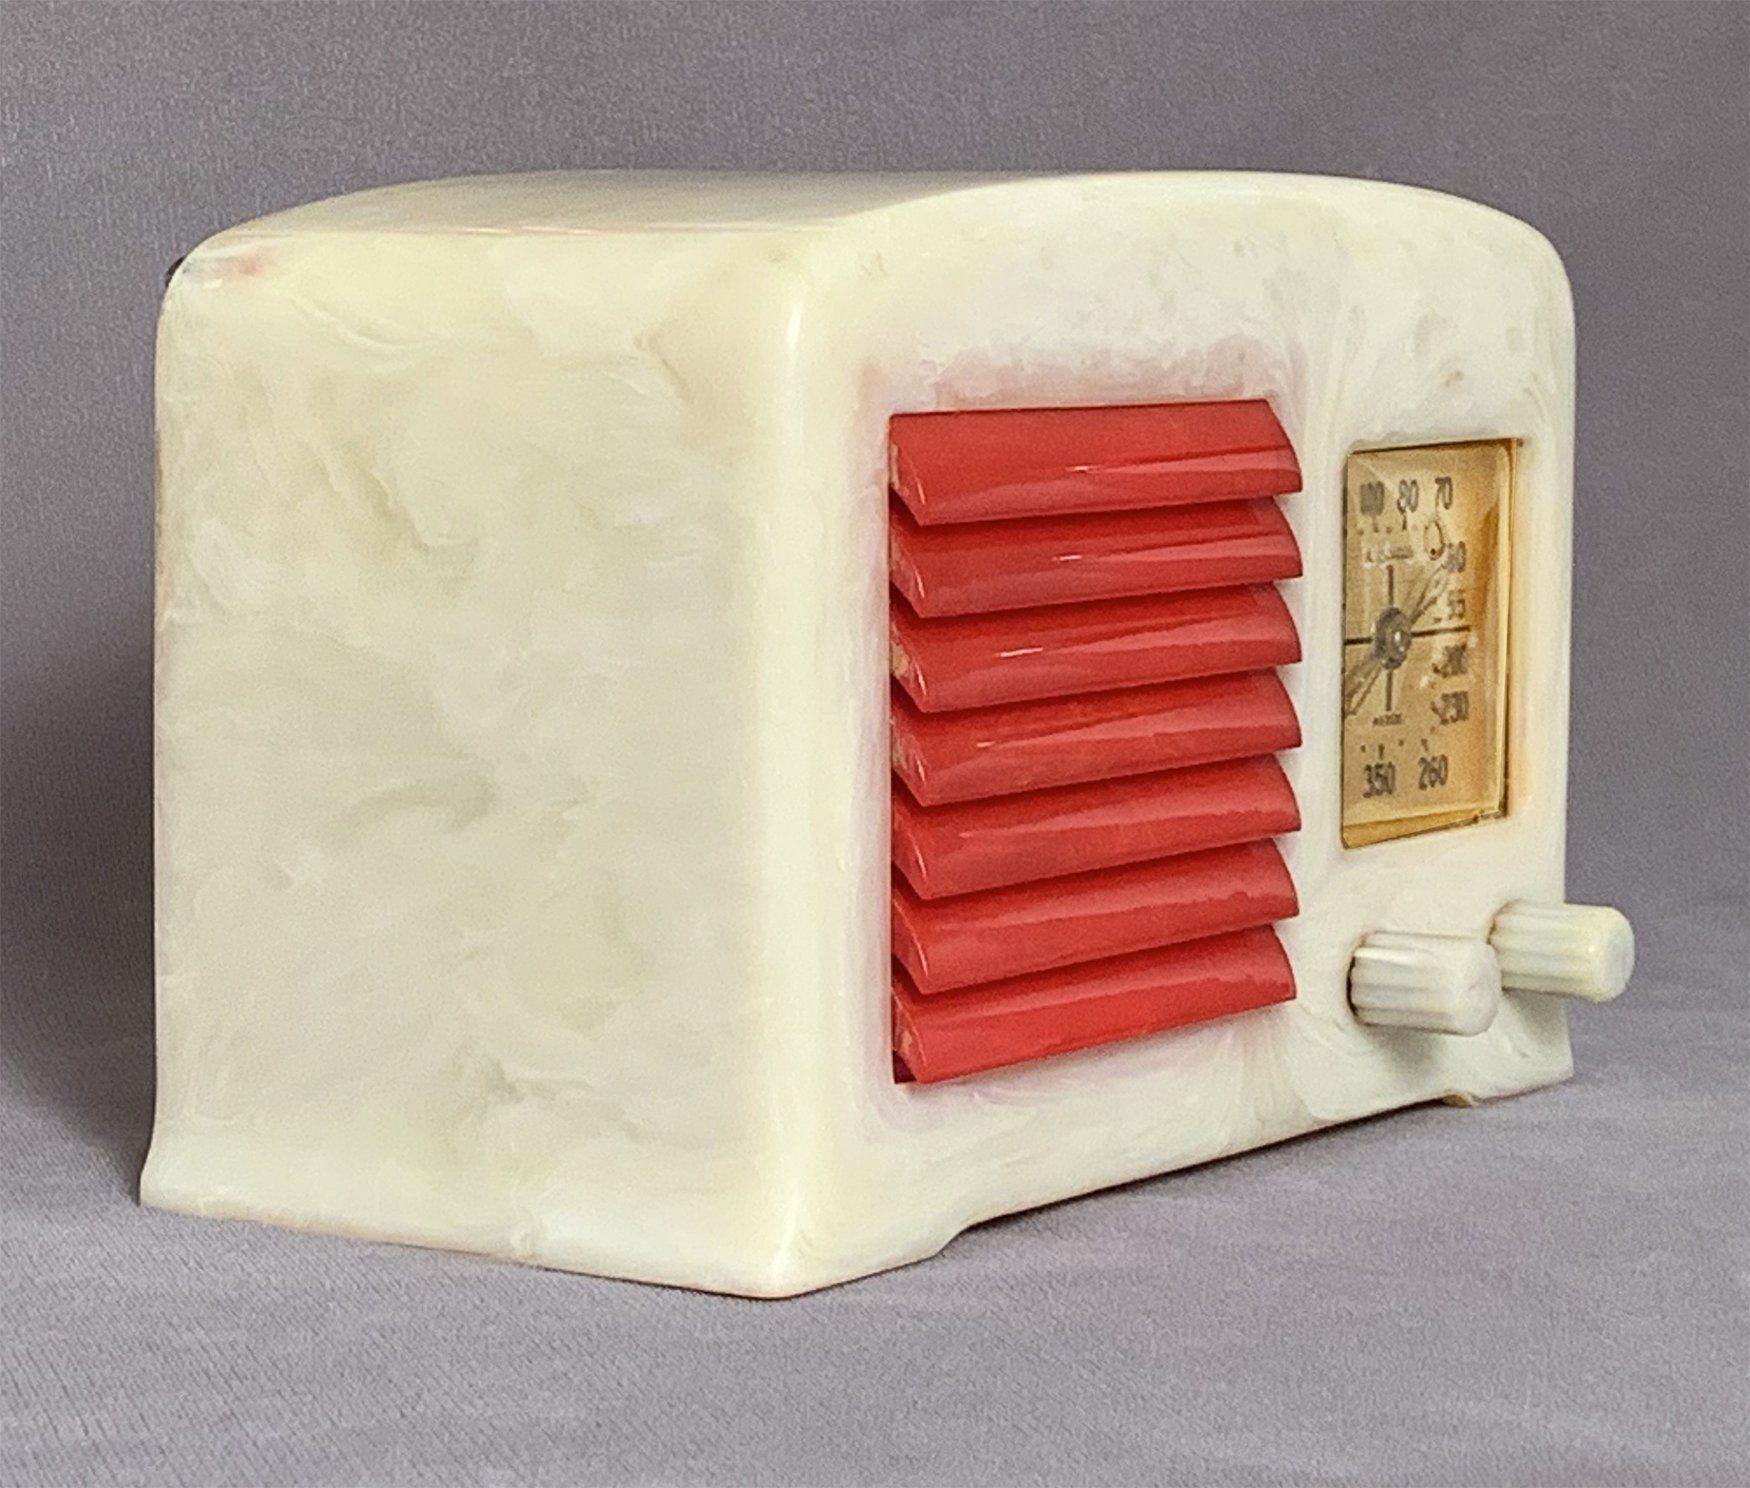 FADA 5F50 53 Catalin Radio- Alabaster with "Cherry" Red Grille